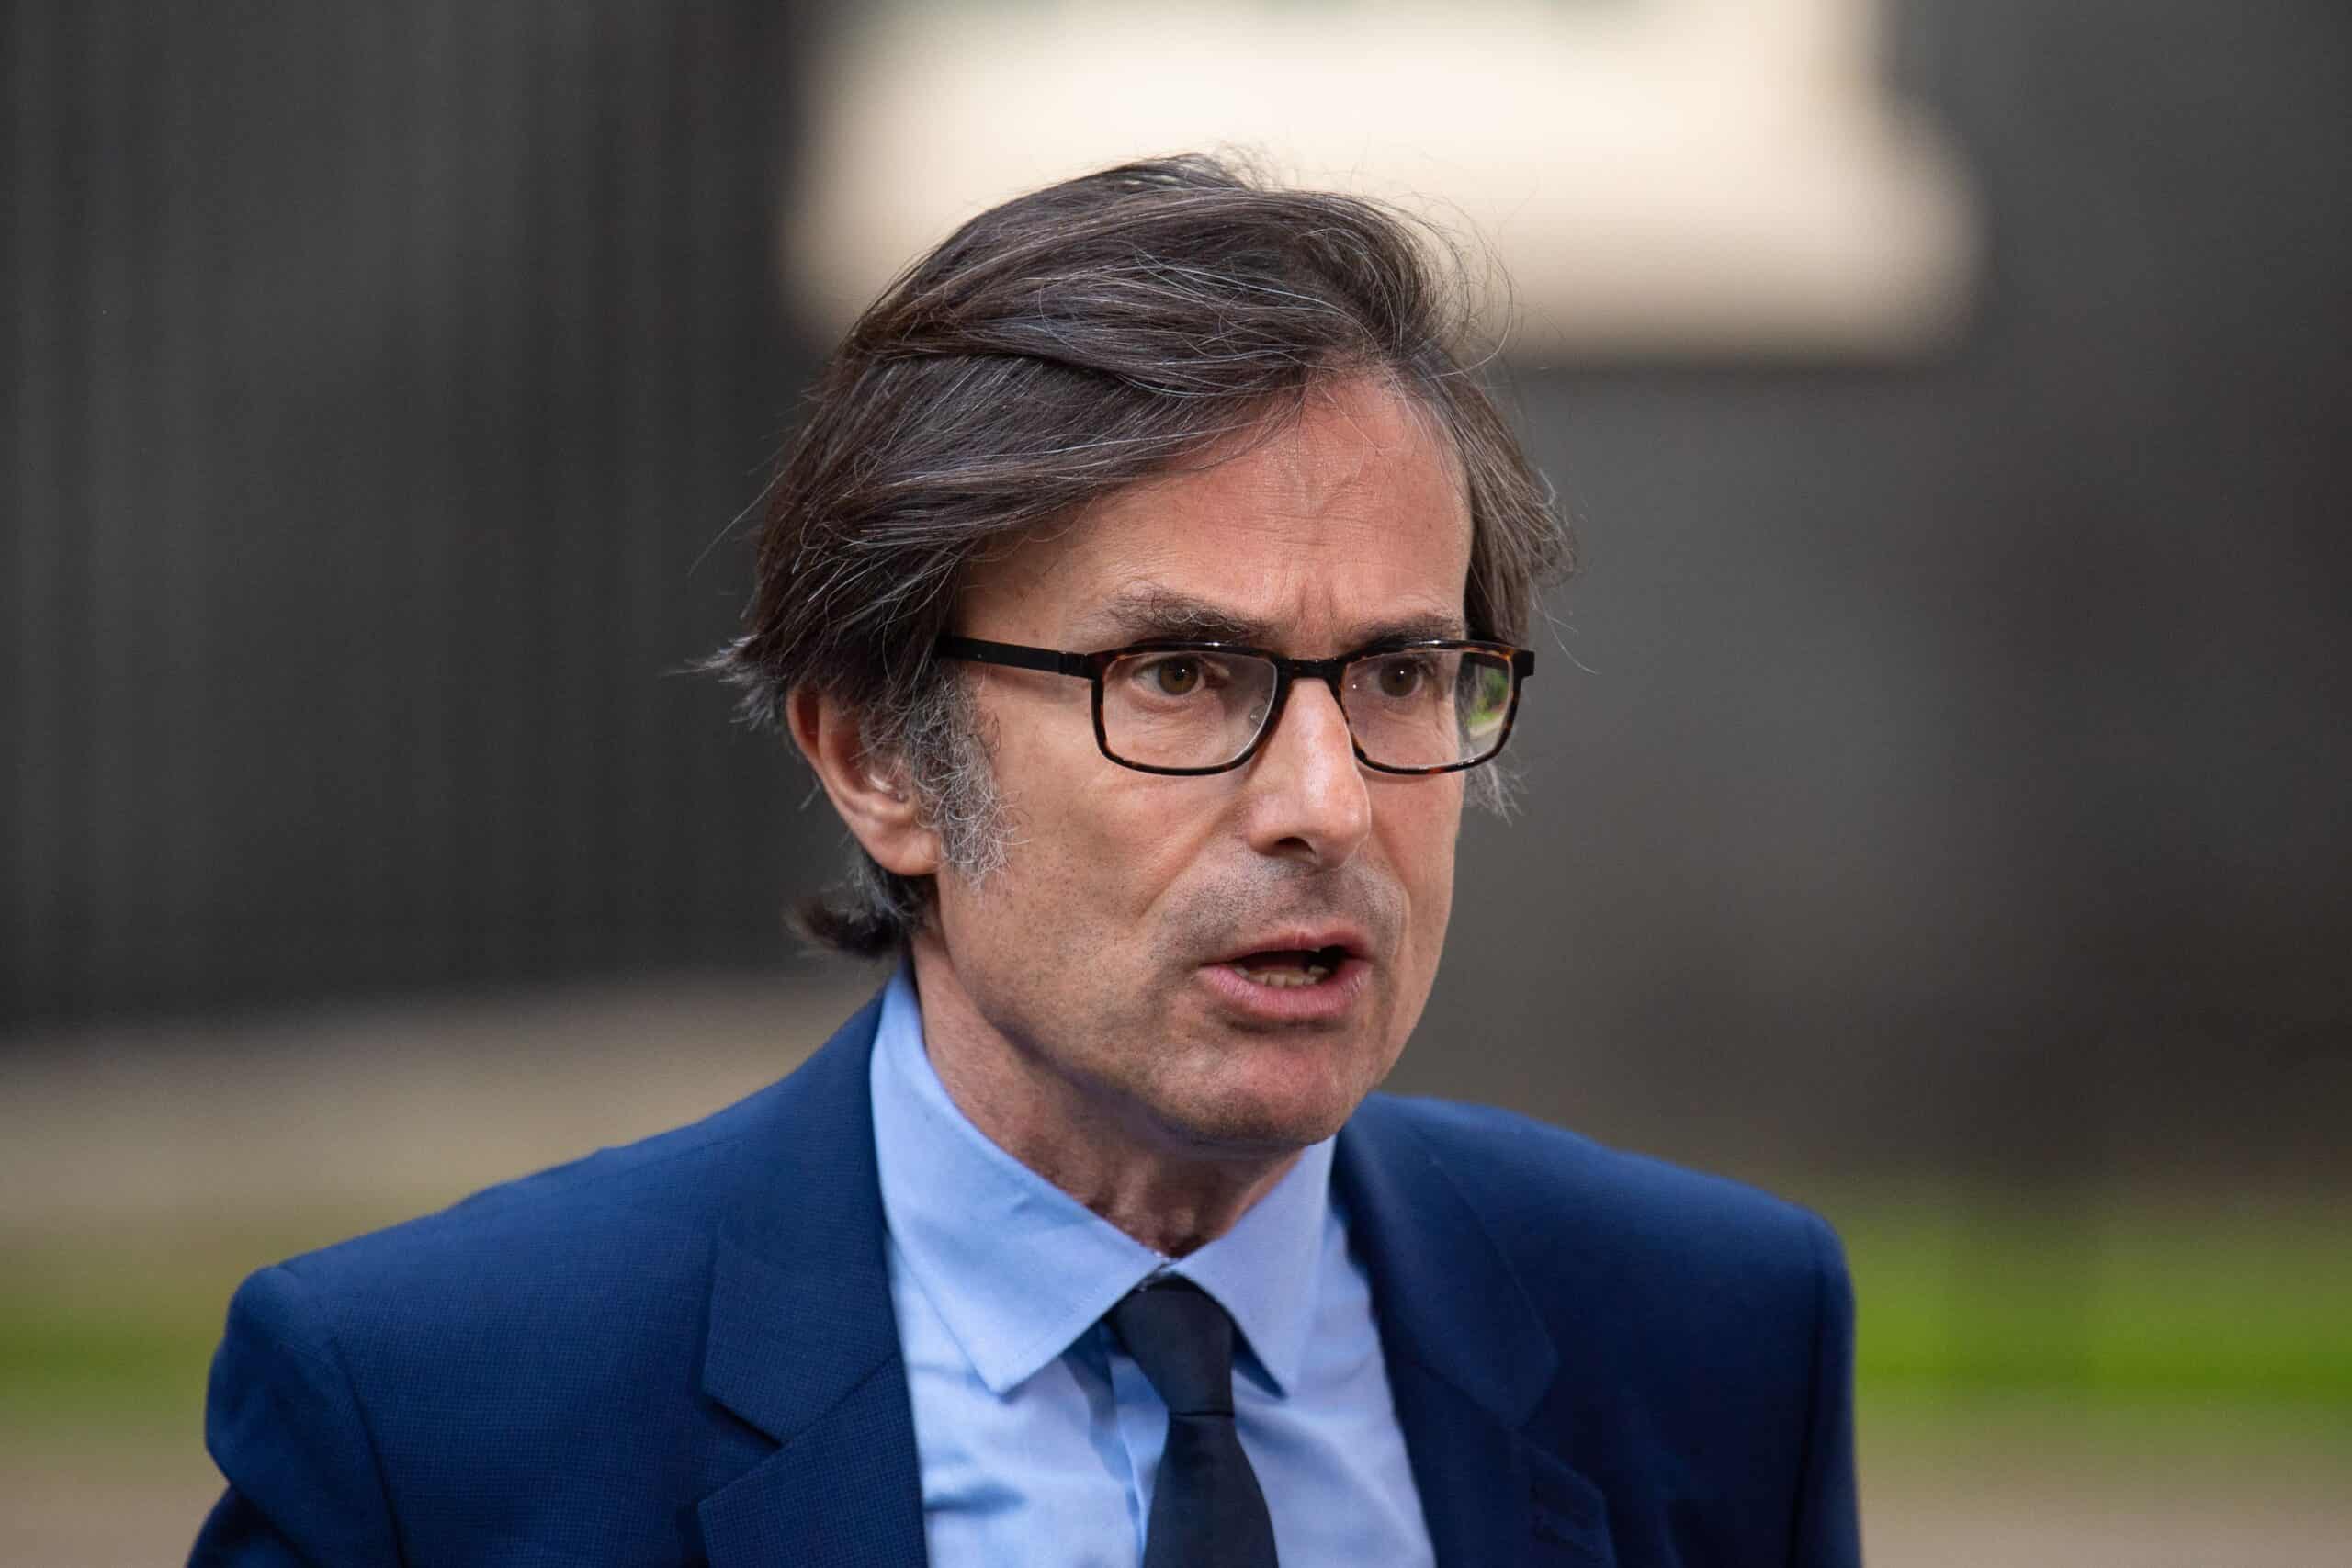 OBR assessment of UK’s debt position is ‘off-the-charts alarming’ – Peston